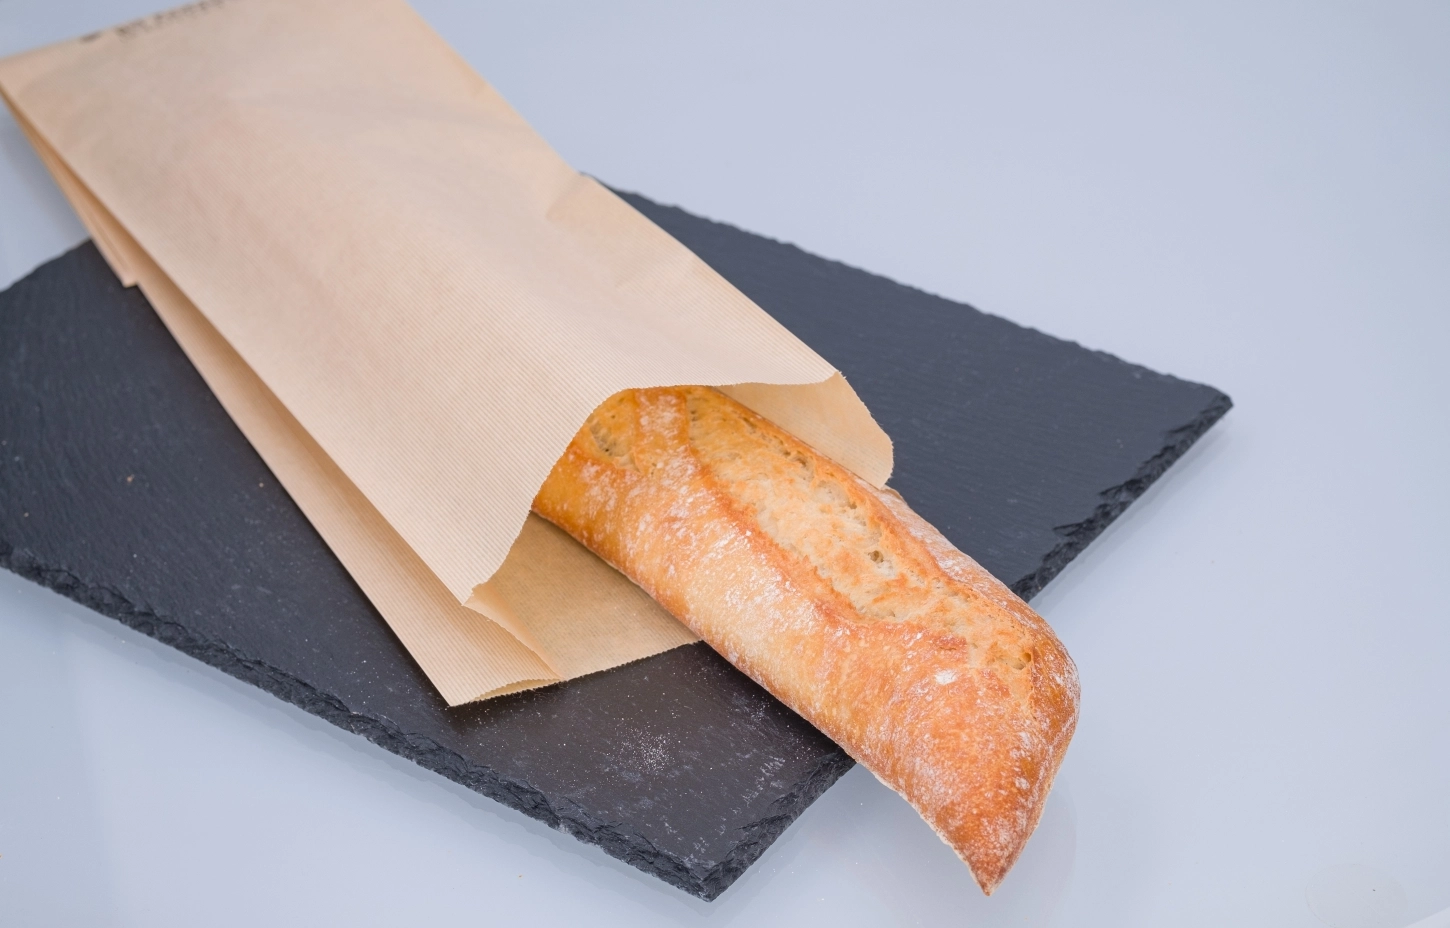 Paper packaging is also used for bakery products.